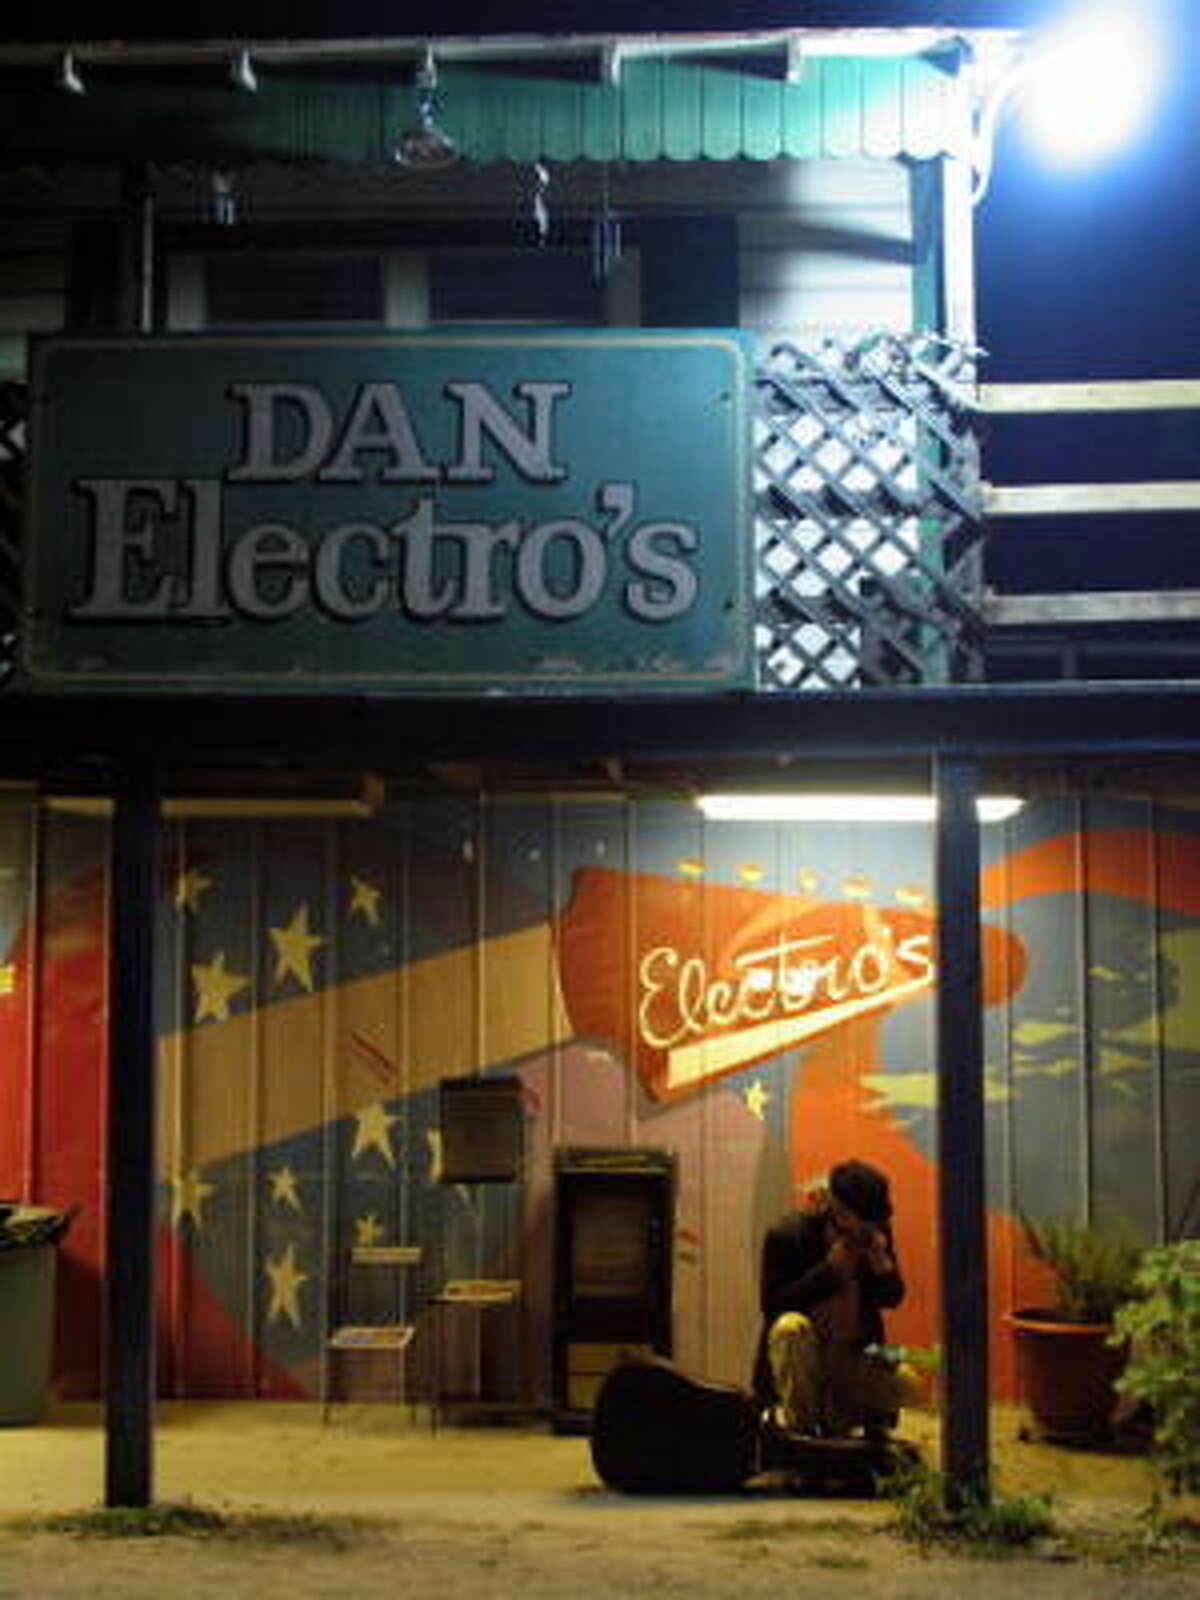 Dan Electro's Guitar Bar reopened its doors Thursday after finishing repairs to the damage caused by Hurricane Ike. Dan Electro's is located at 1031 E. 24th.